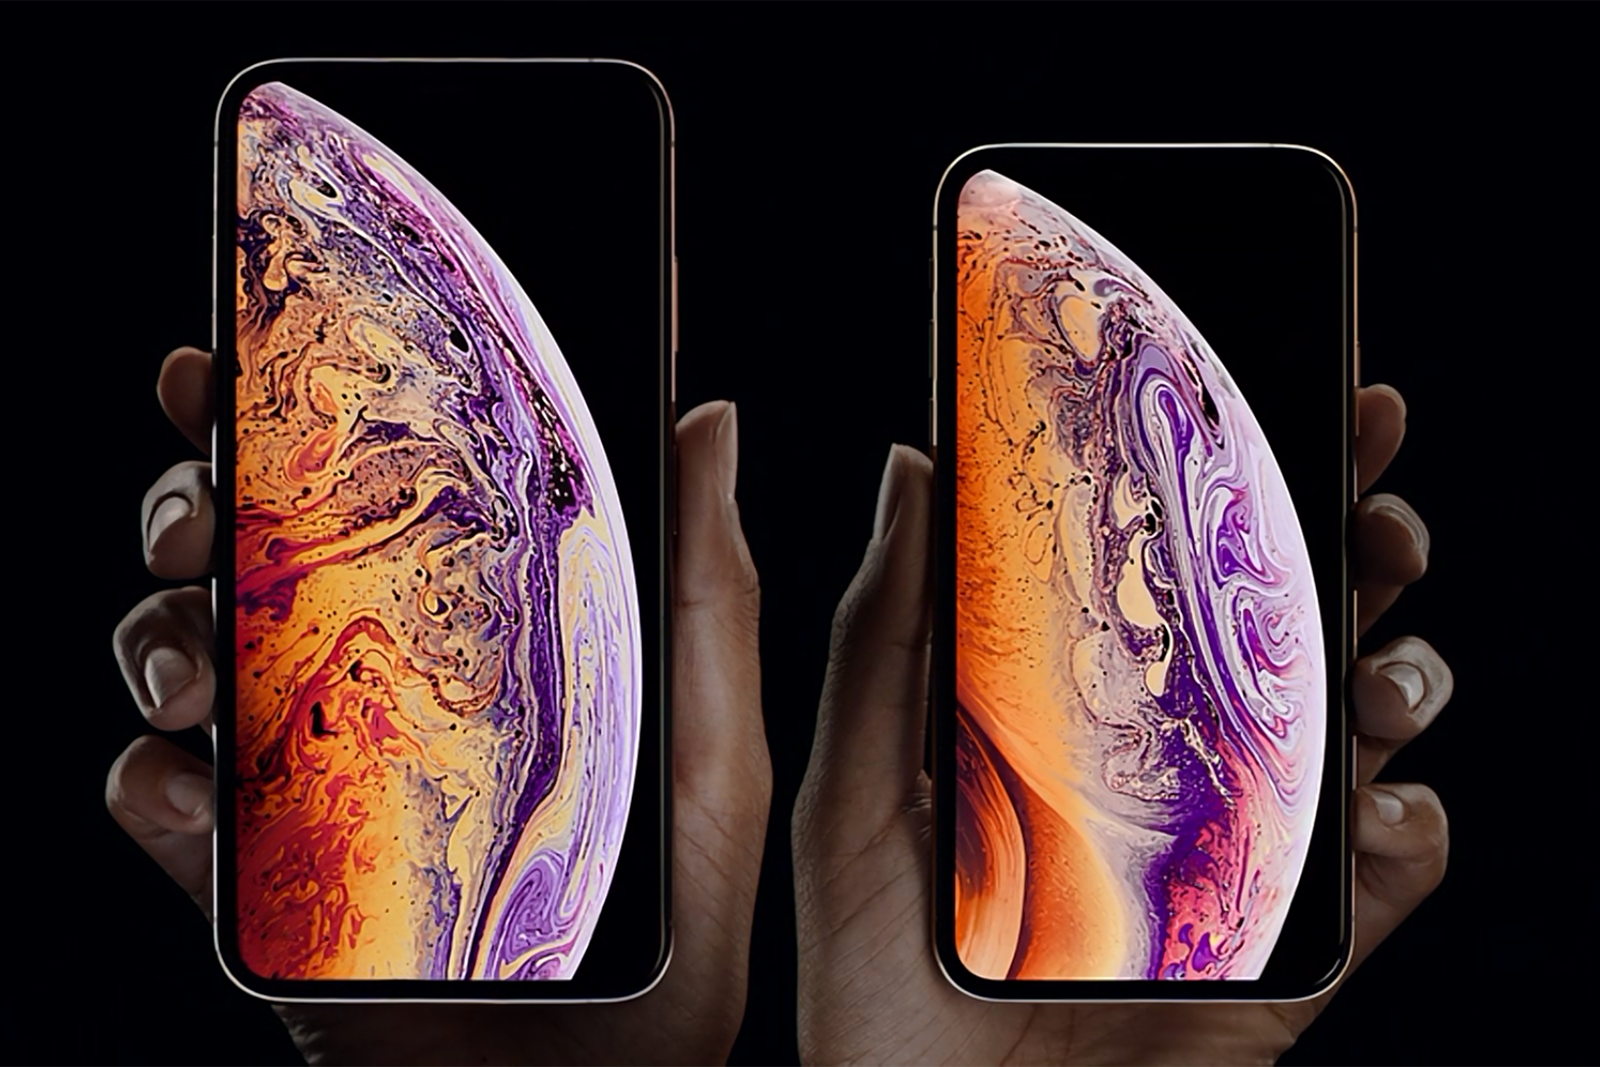 Its official Apple unveils its new iPhone XS smartphone image 1